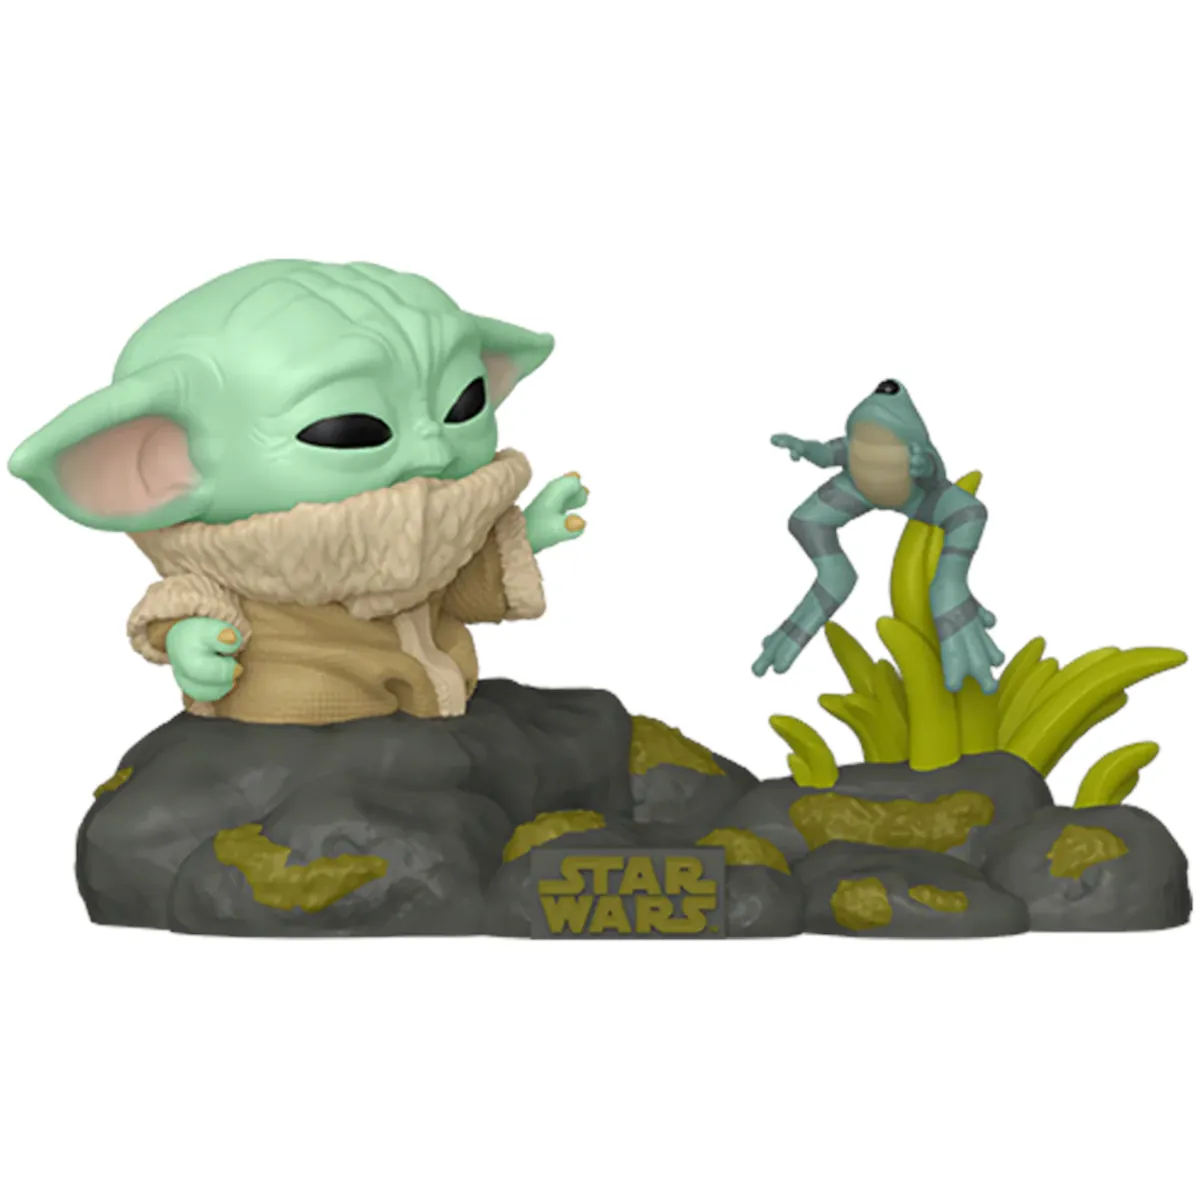 80000 Funko Pop! Television - Star Wars The Mandalorian - Grogu with Frog Collectable Vinyl Figure